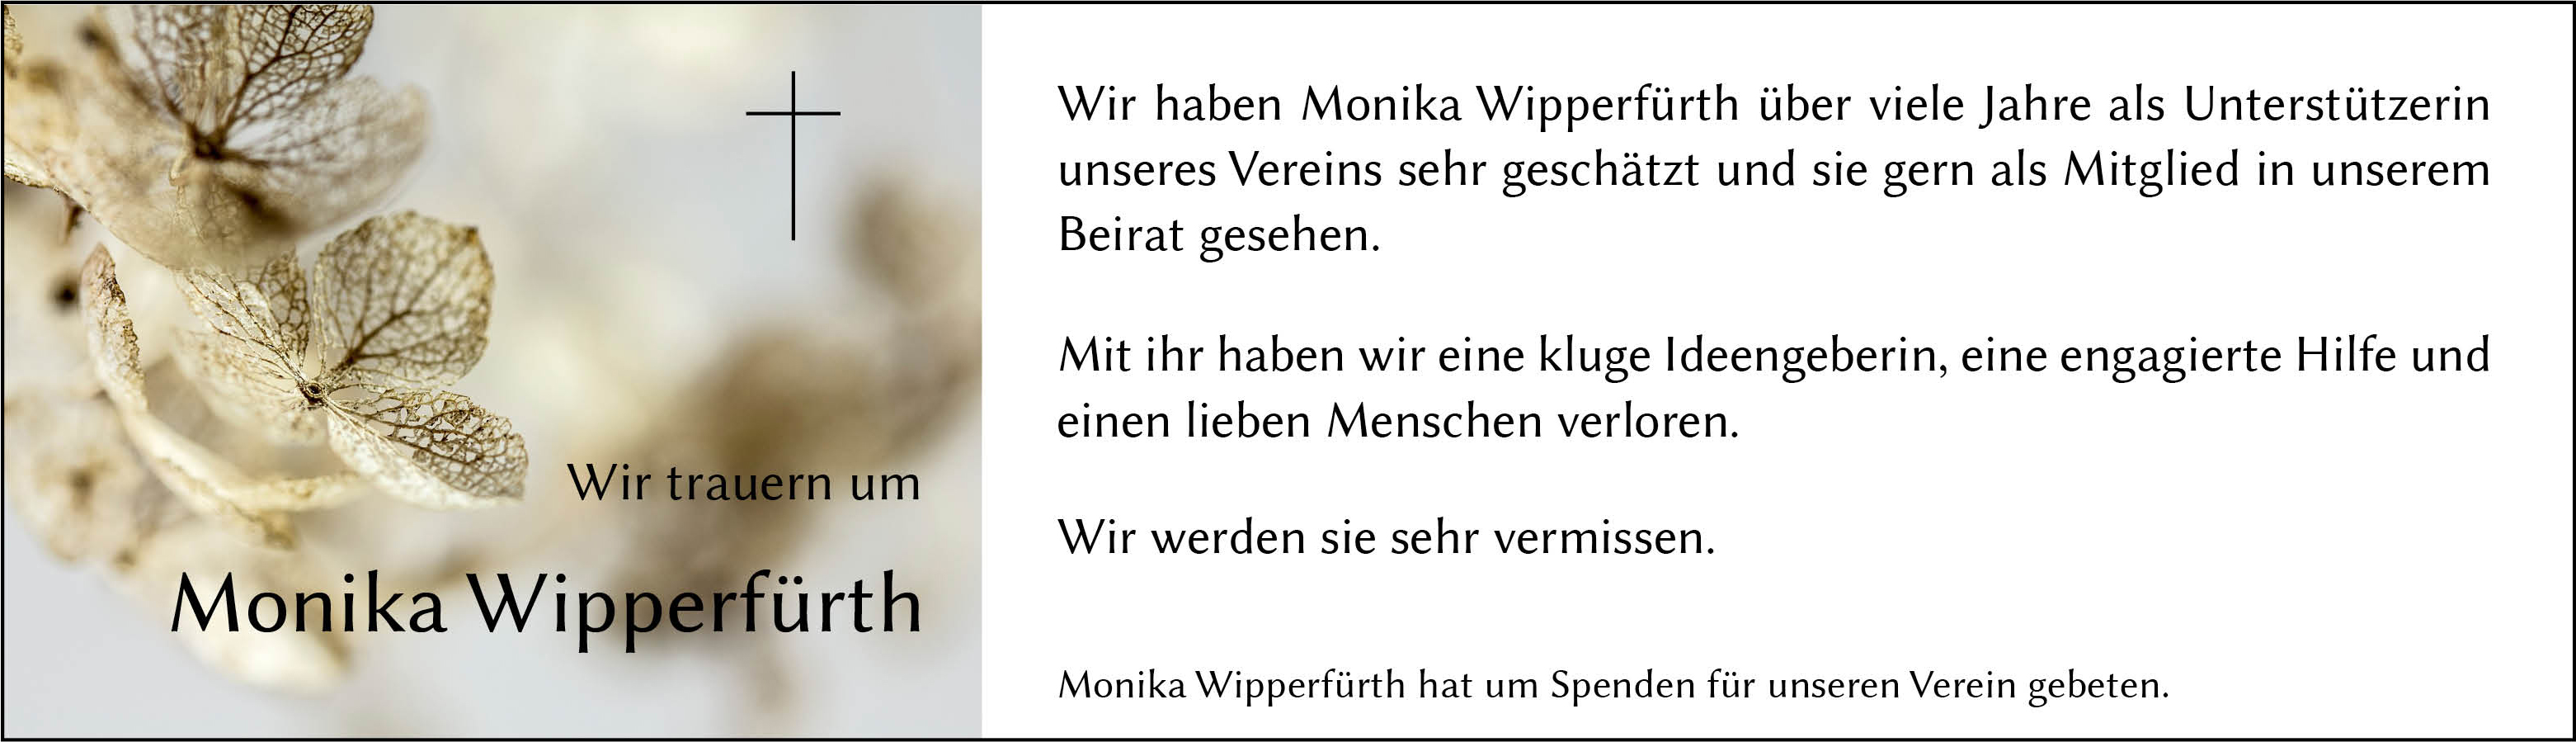 wipperfuerth